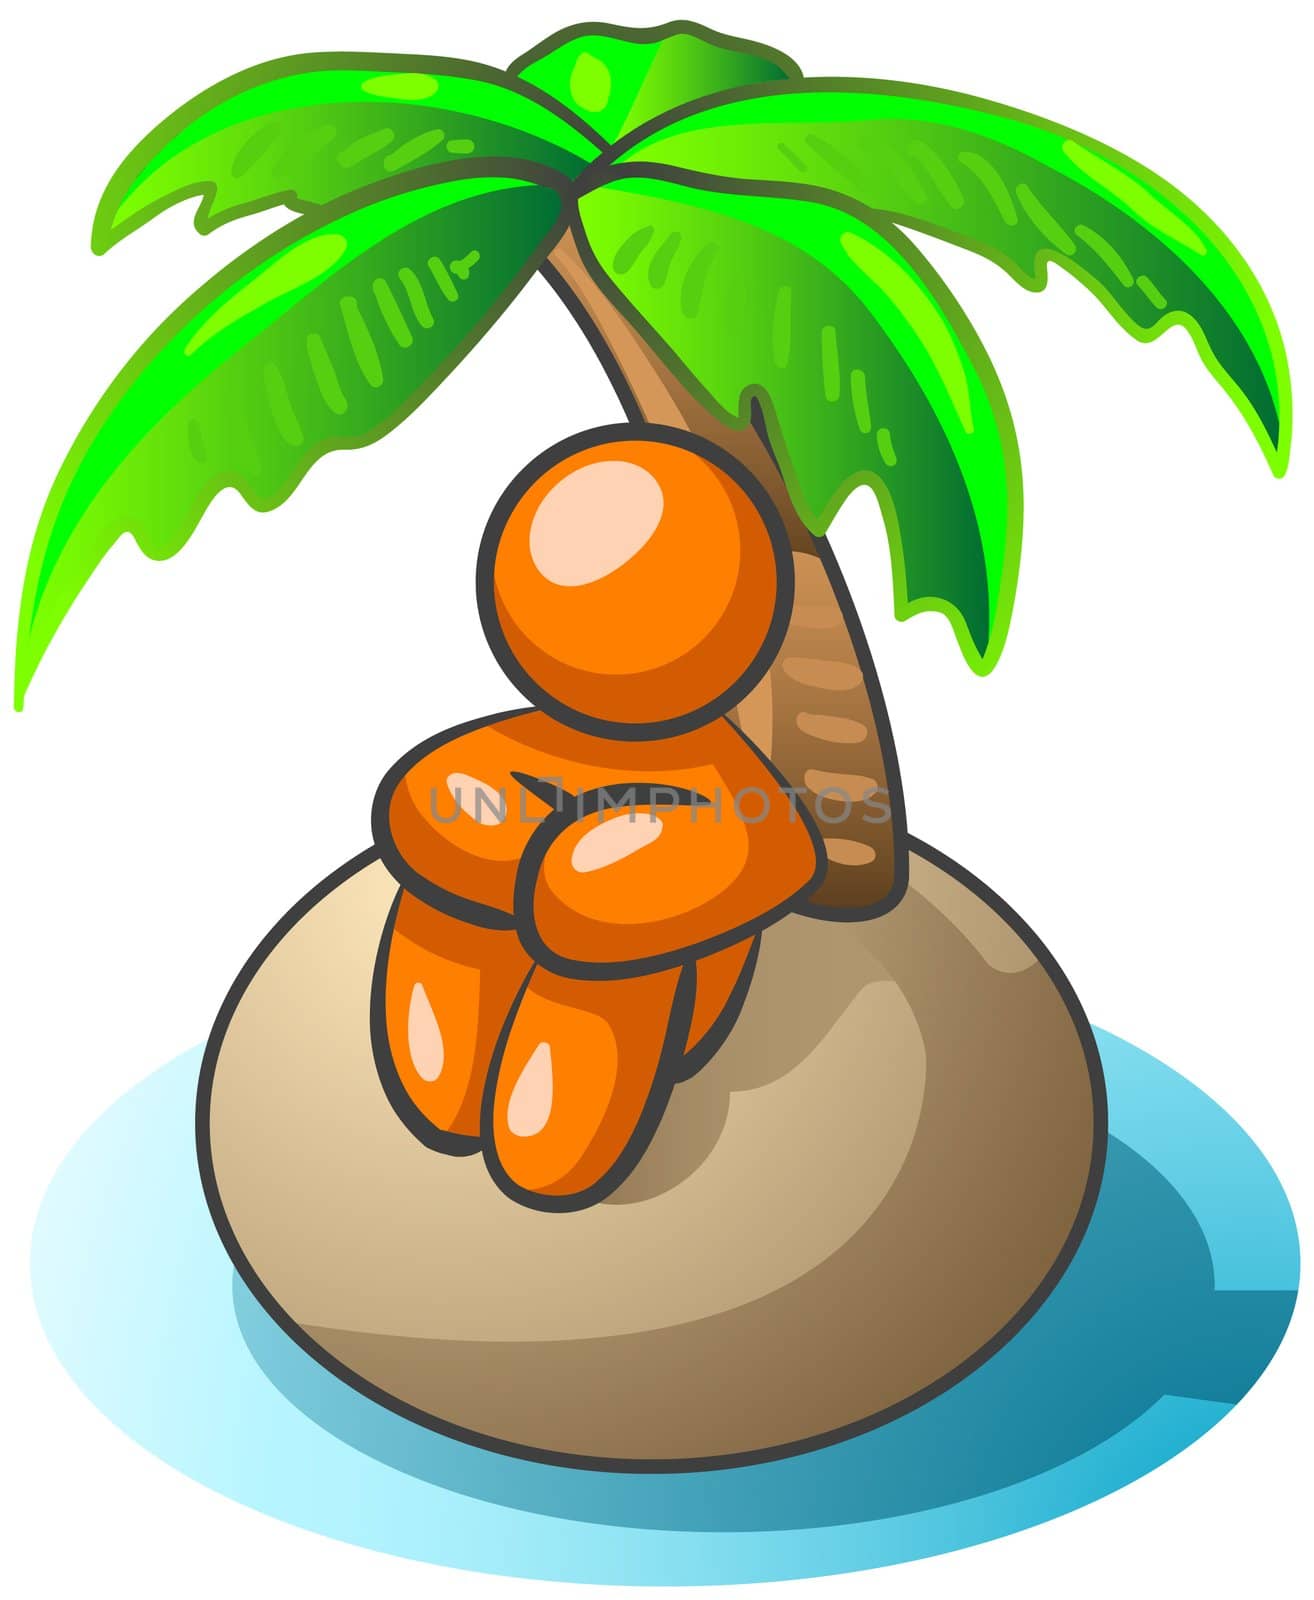 An orange man on an island taking a vacation, or perhaps standed!